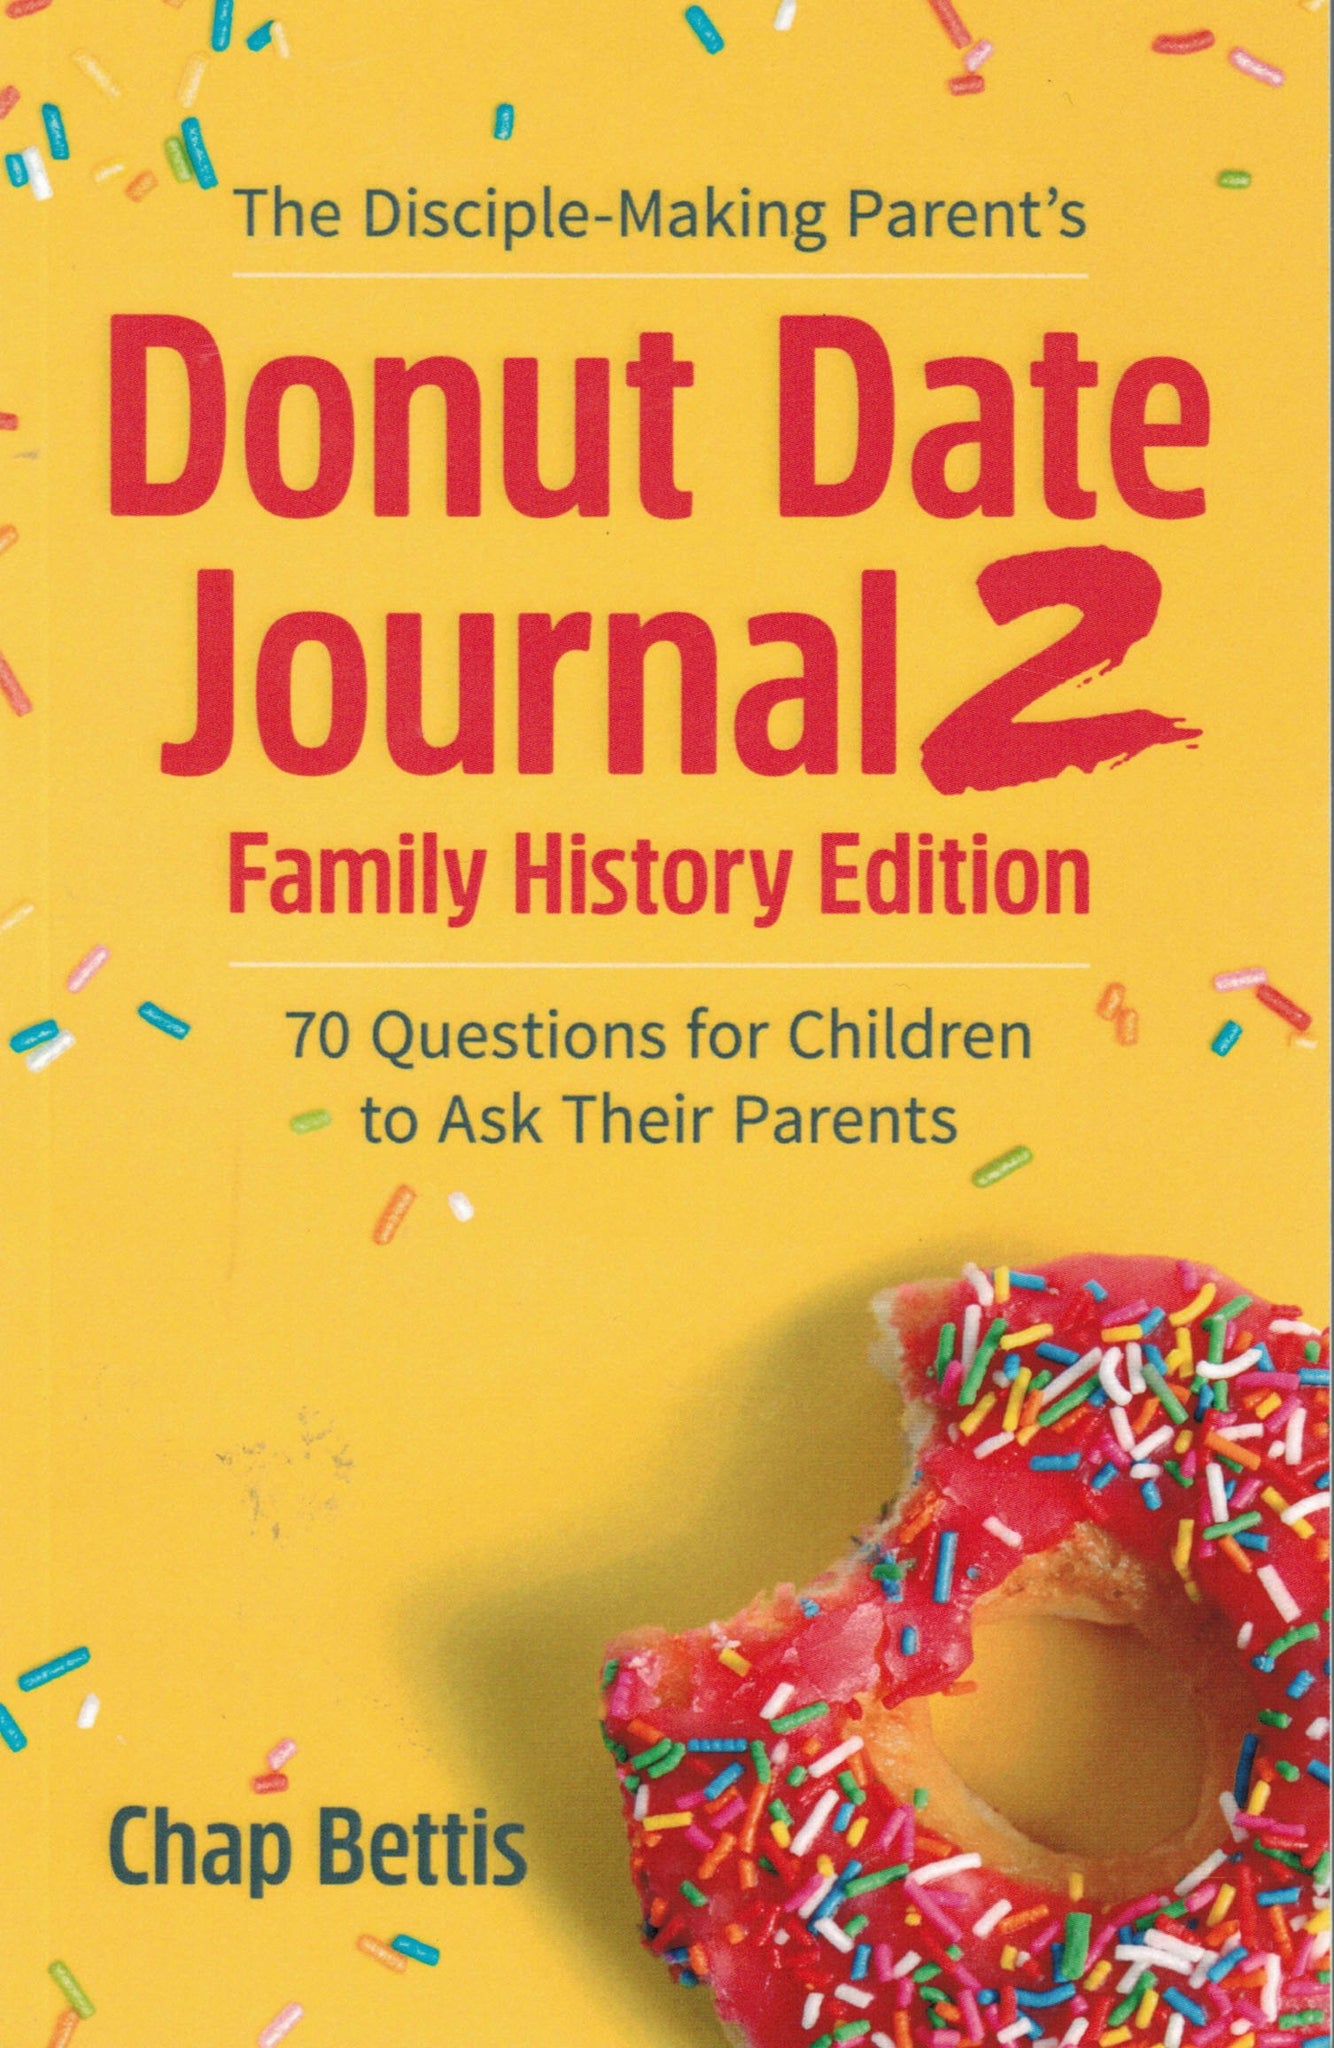 Donut Date Journal 2 -  Family History Edition: 70 Questions for Children to Ask Their Parents